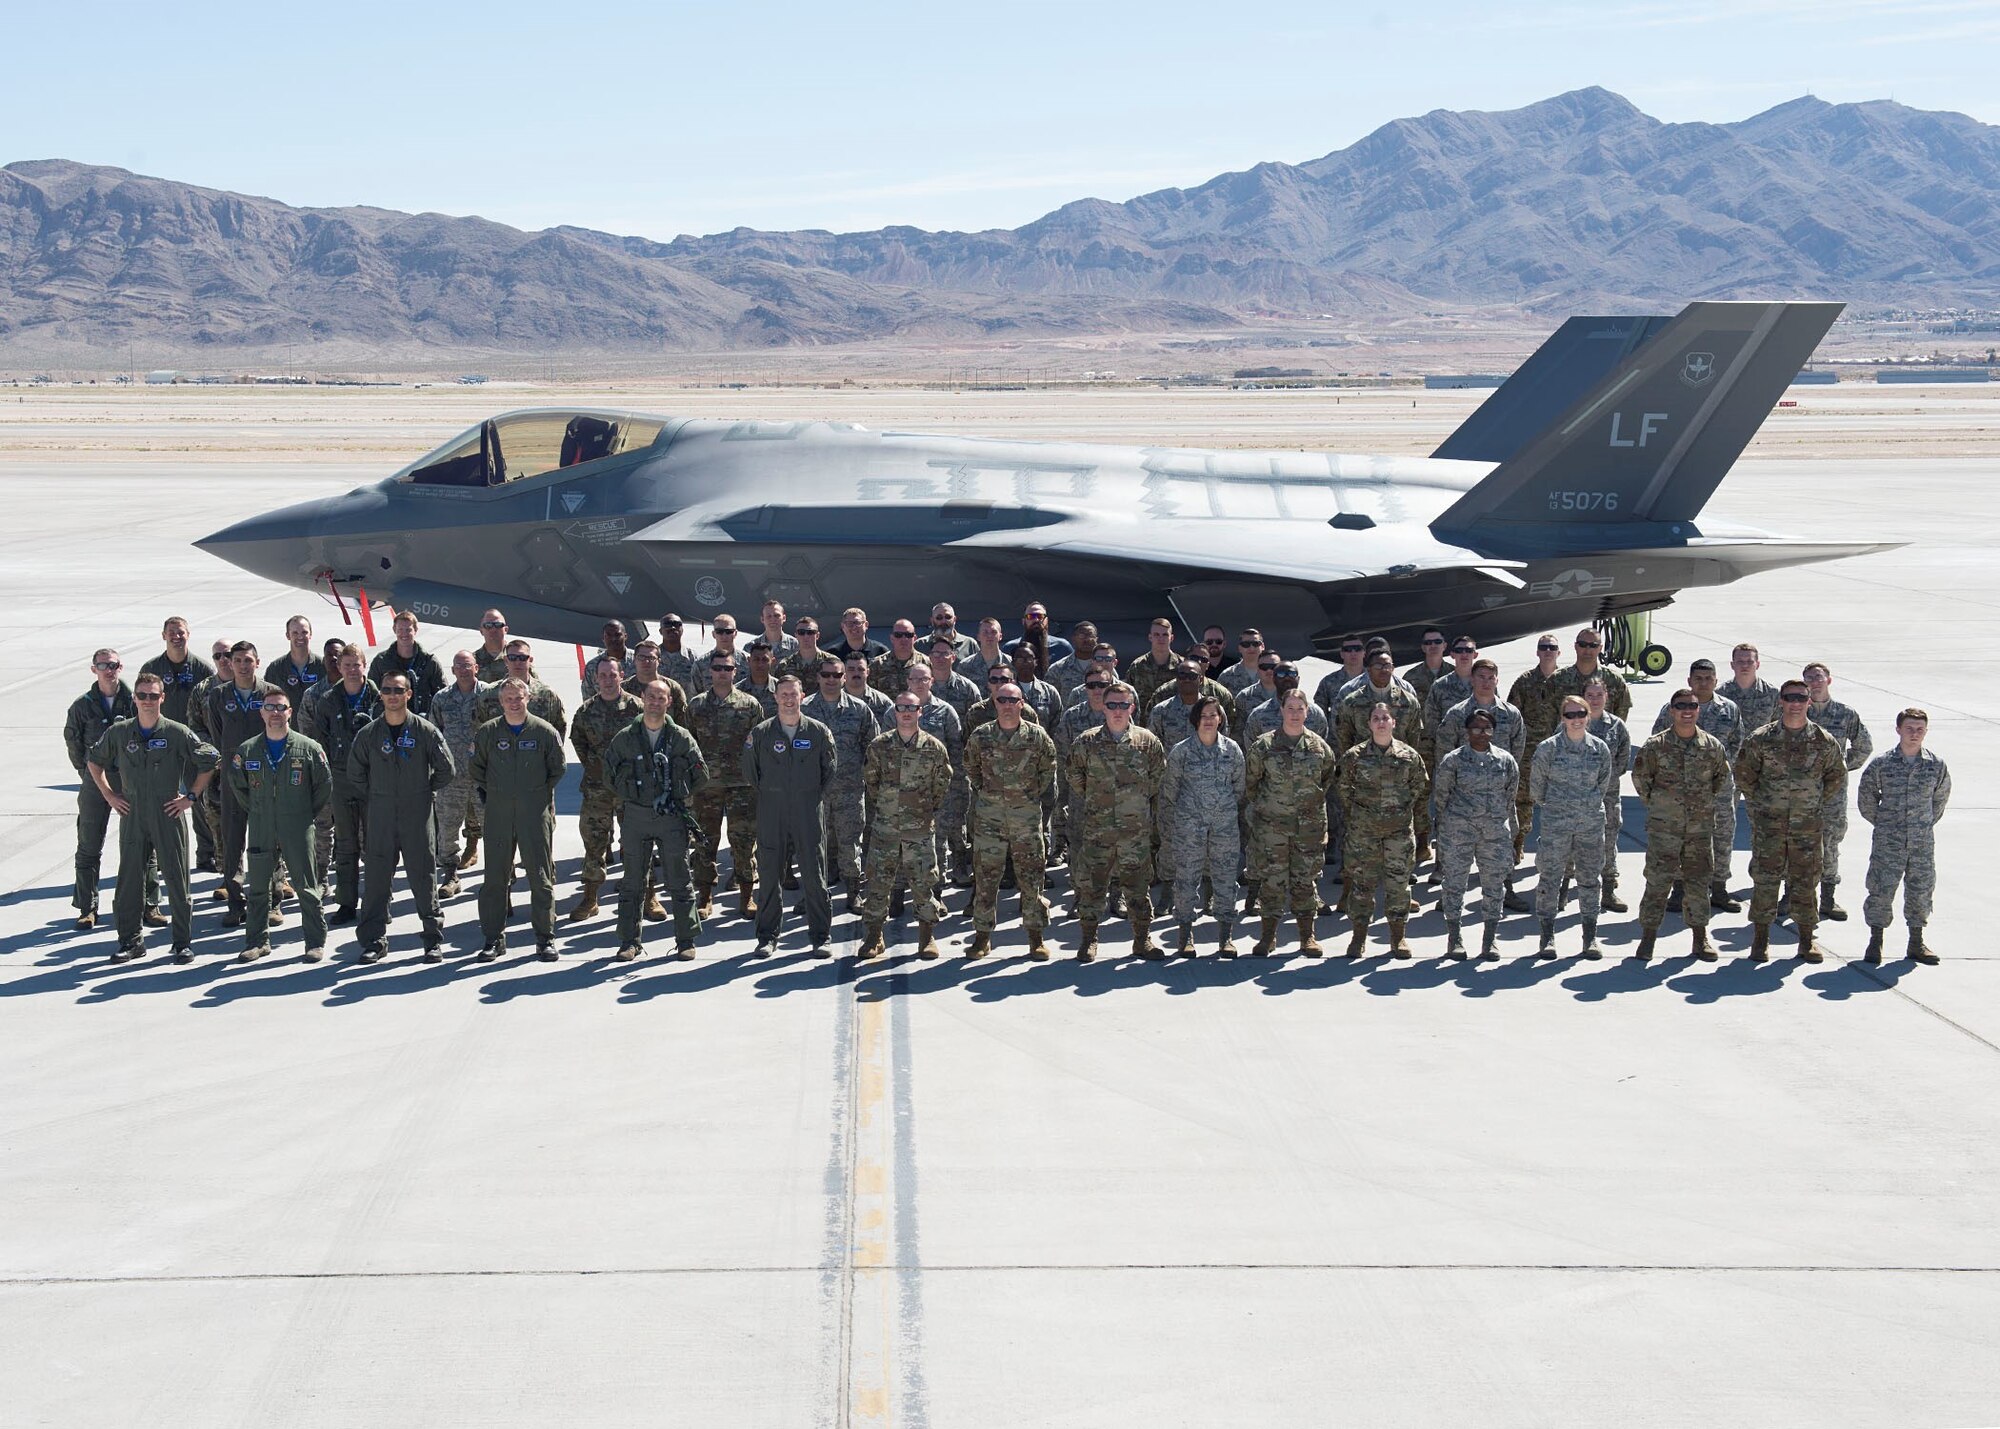 Members of the 62nd Fighter Squadron from Luke Air Force Base pose for a group photo March 9, 2019, at Nellis Air Force Base, Nev.  The team traveled to Nellis AFB to participate in Red Flag, exercise 19-2, and included Italian, Norwegian and U.S. personnel.